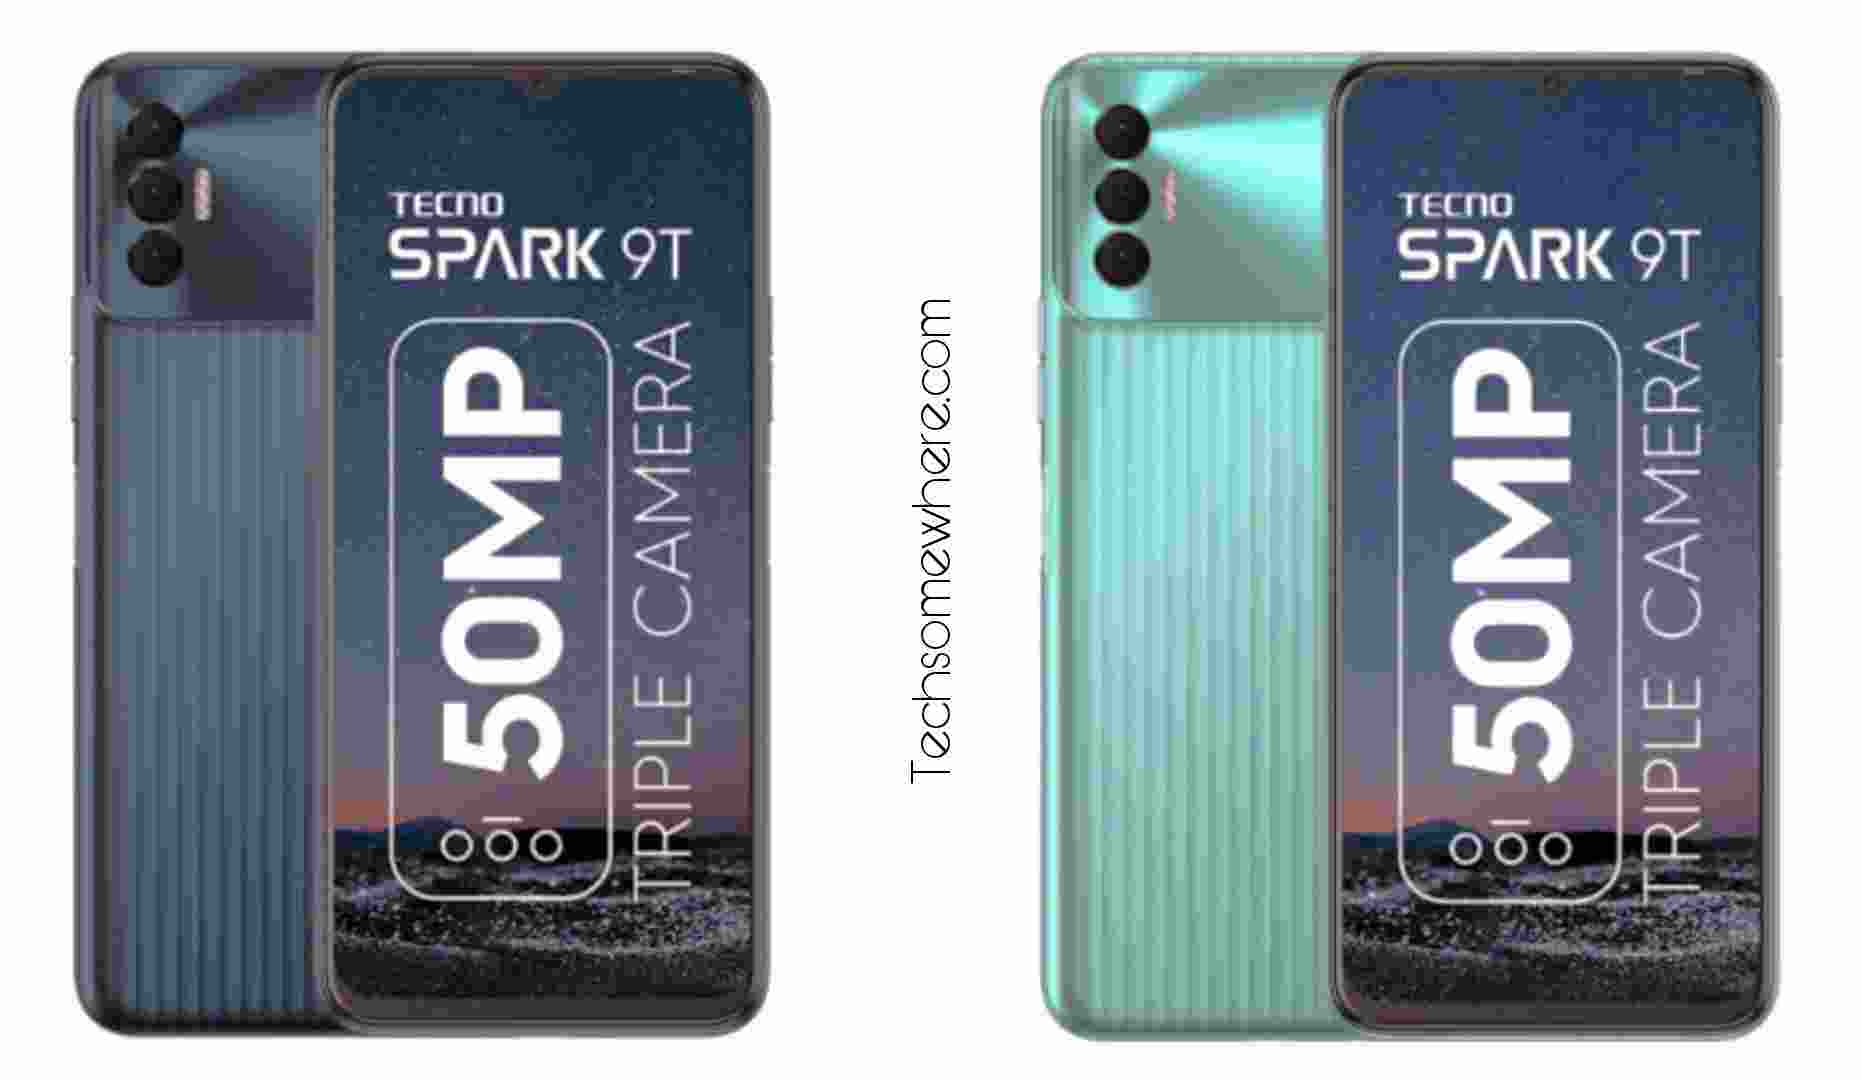 Is Tecno Spark 9T will be the first phone under Rs 10,000 With 11 GB RAM?